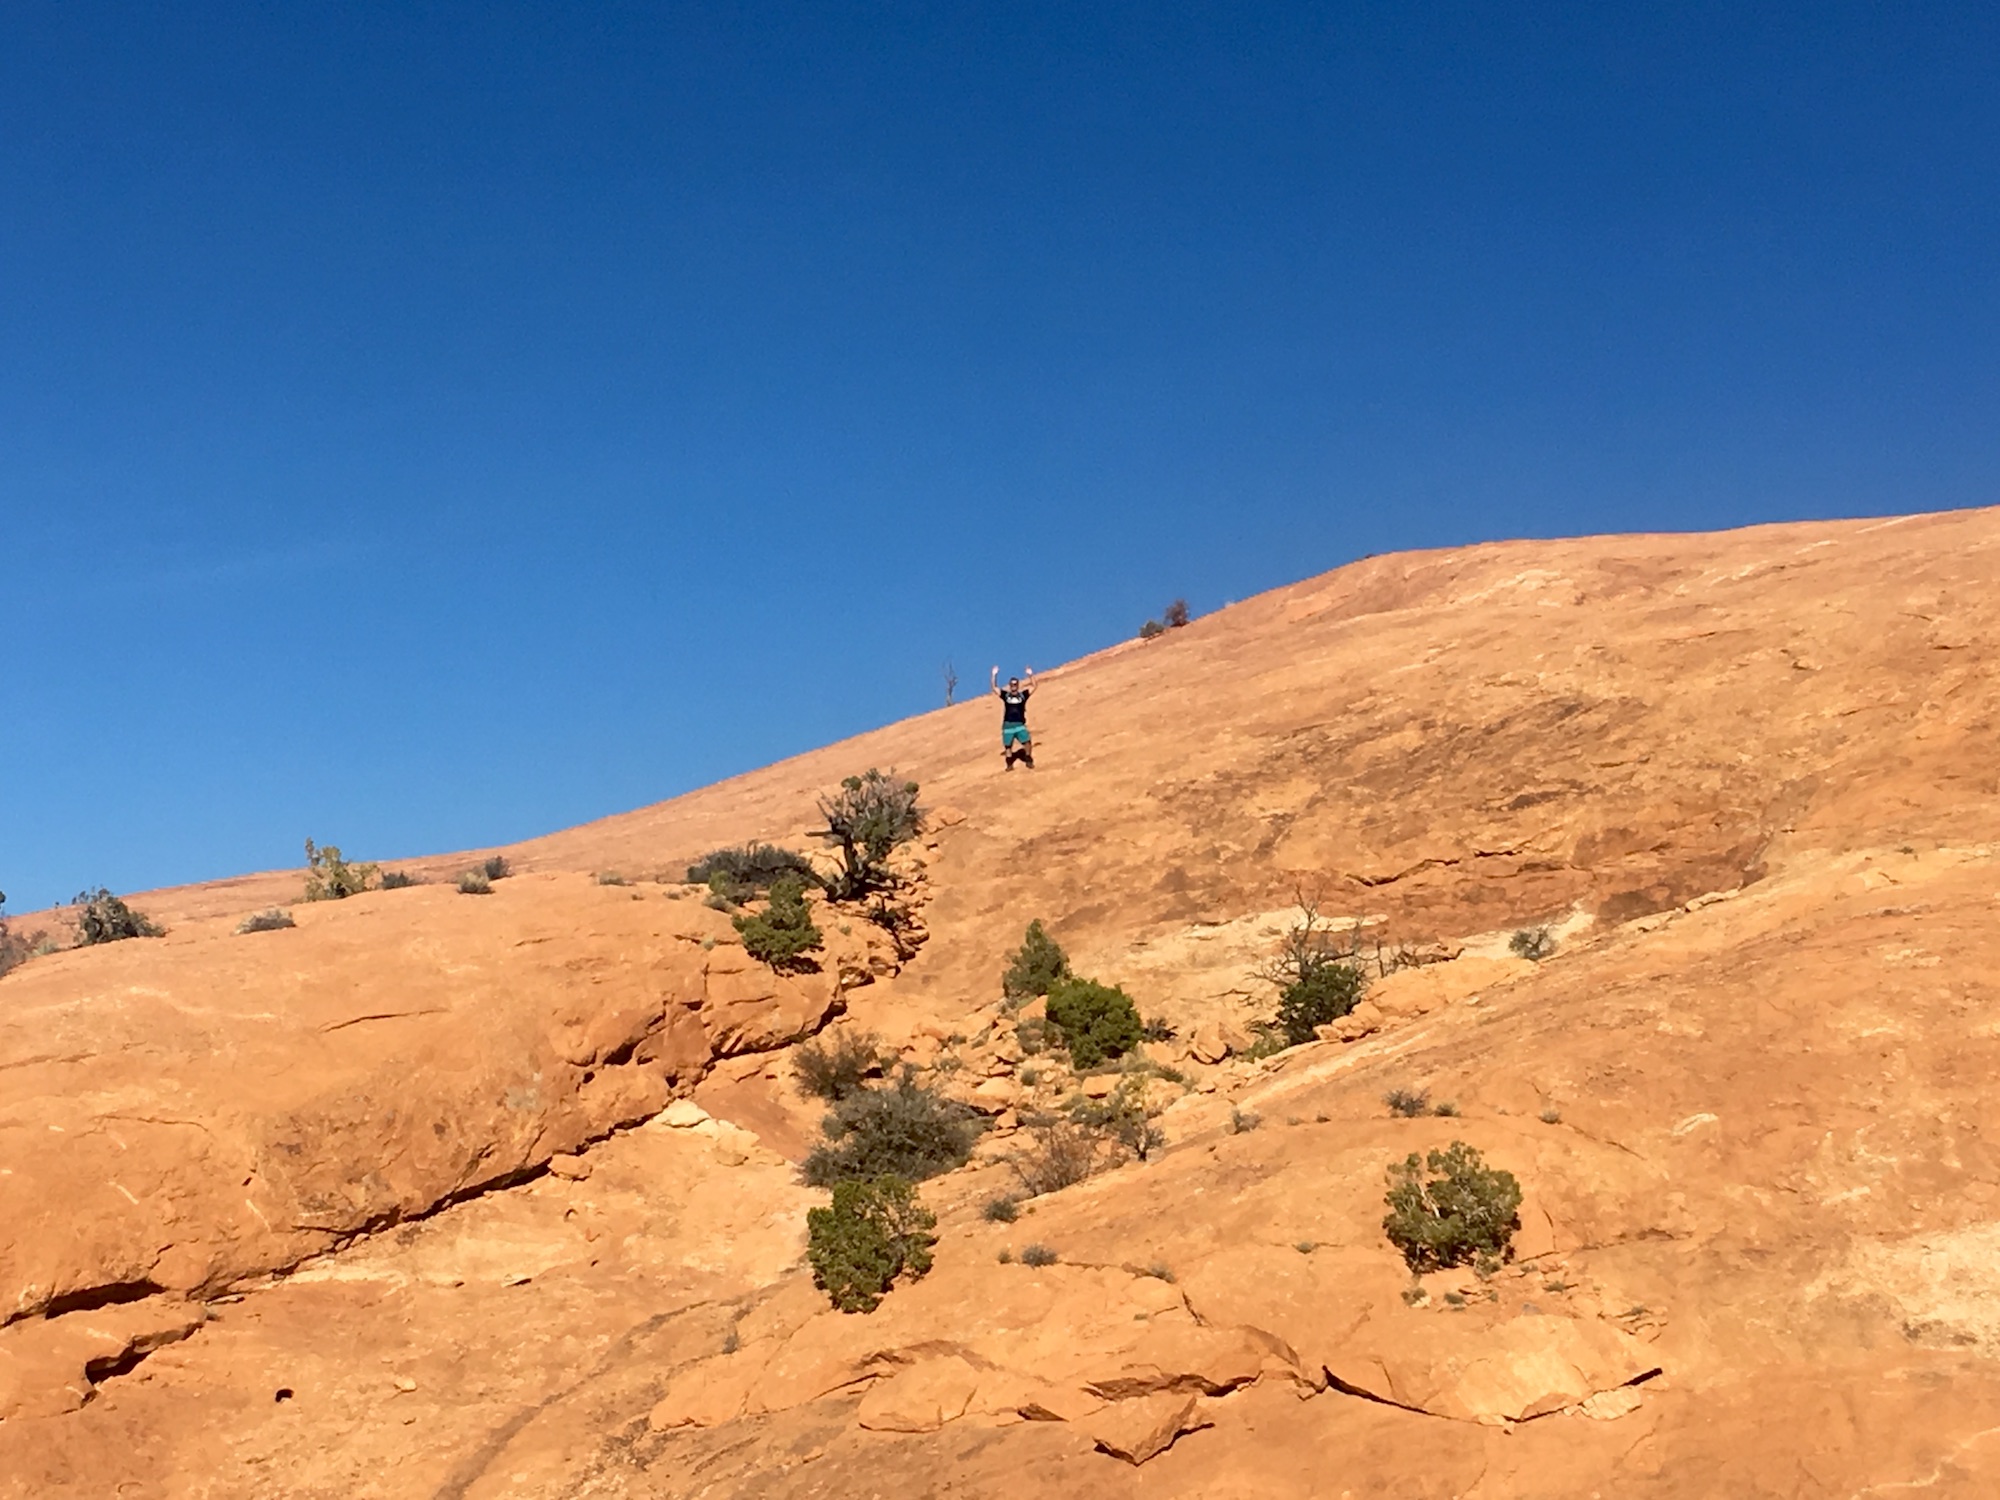 JP challenged by the Upheaval Dome, Canyonlands :)